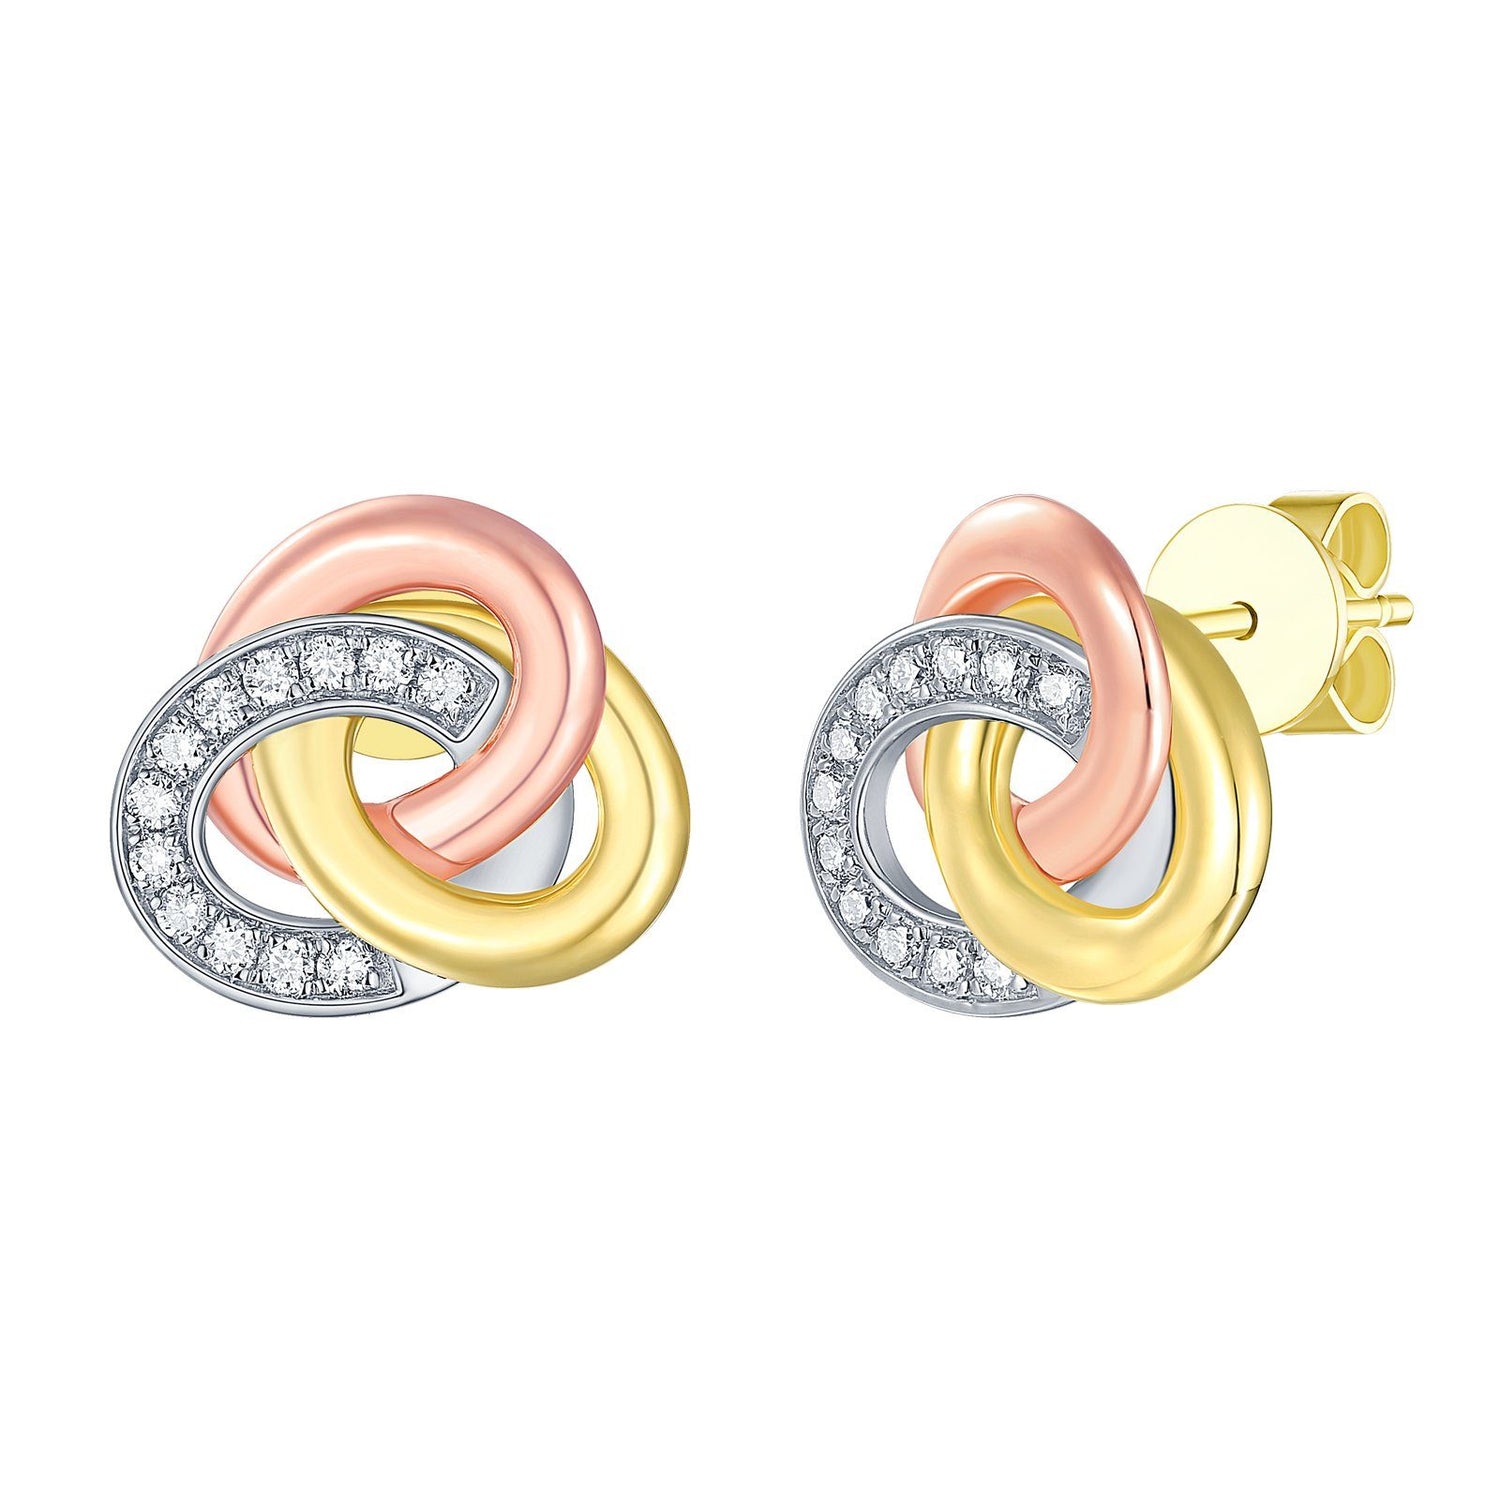 Limitless Collection Lab Grown Diamond Stud earrings Analucia Beltran Diamonds 14 kt yellow rose and rhodium plated